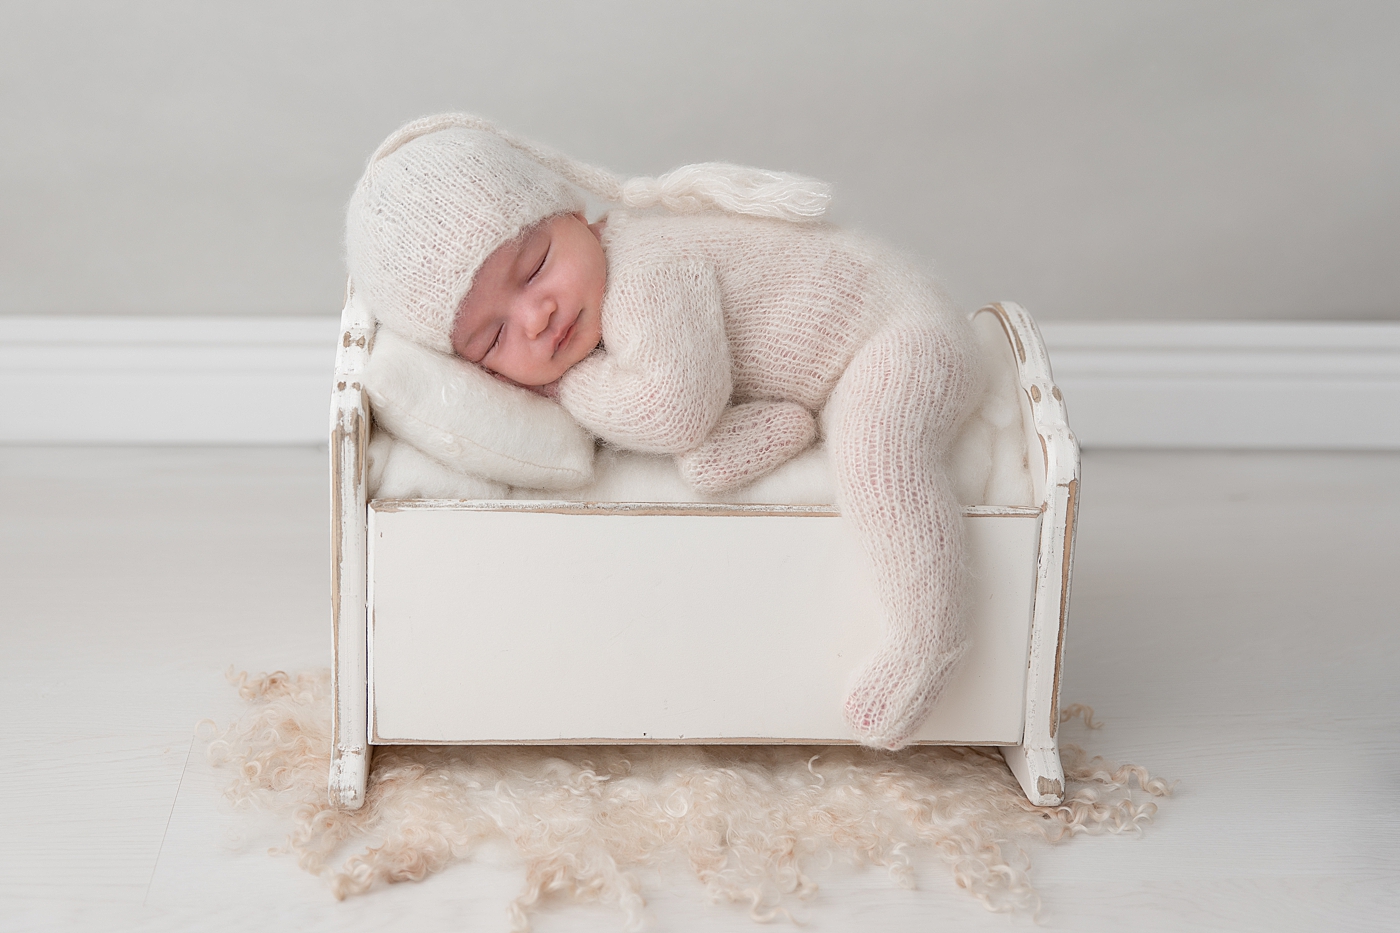 Posed newborn photo of baby boy sleeping on a small bed. Photo by Rachel Brookes Photography.